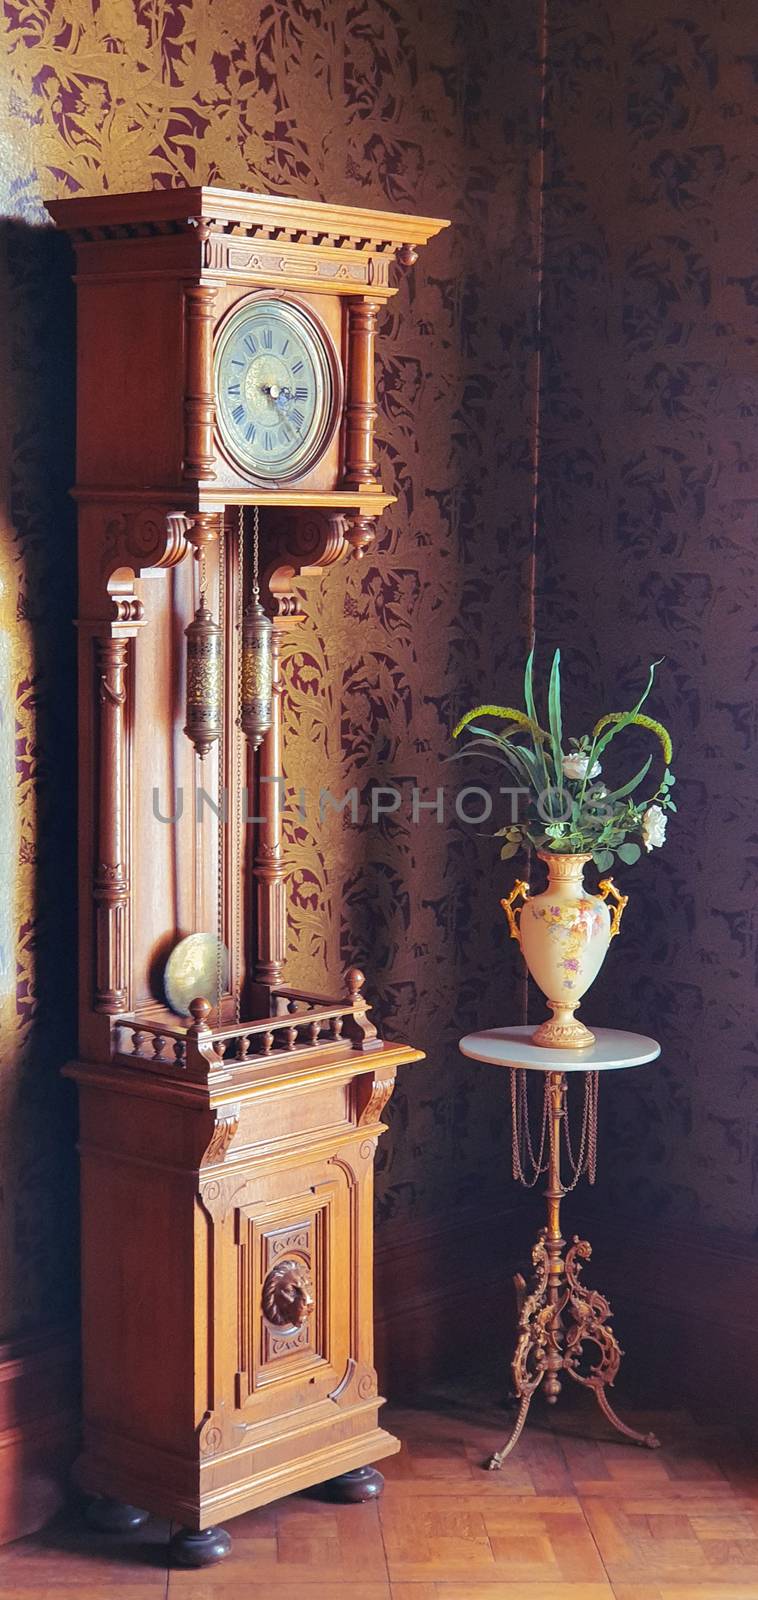 Old fashioned grandfather clock and antique vase by Mendelex